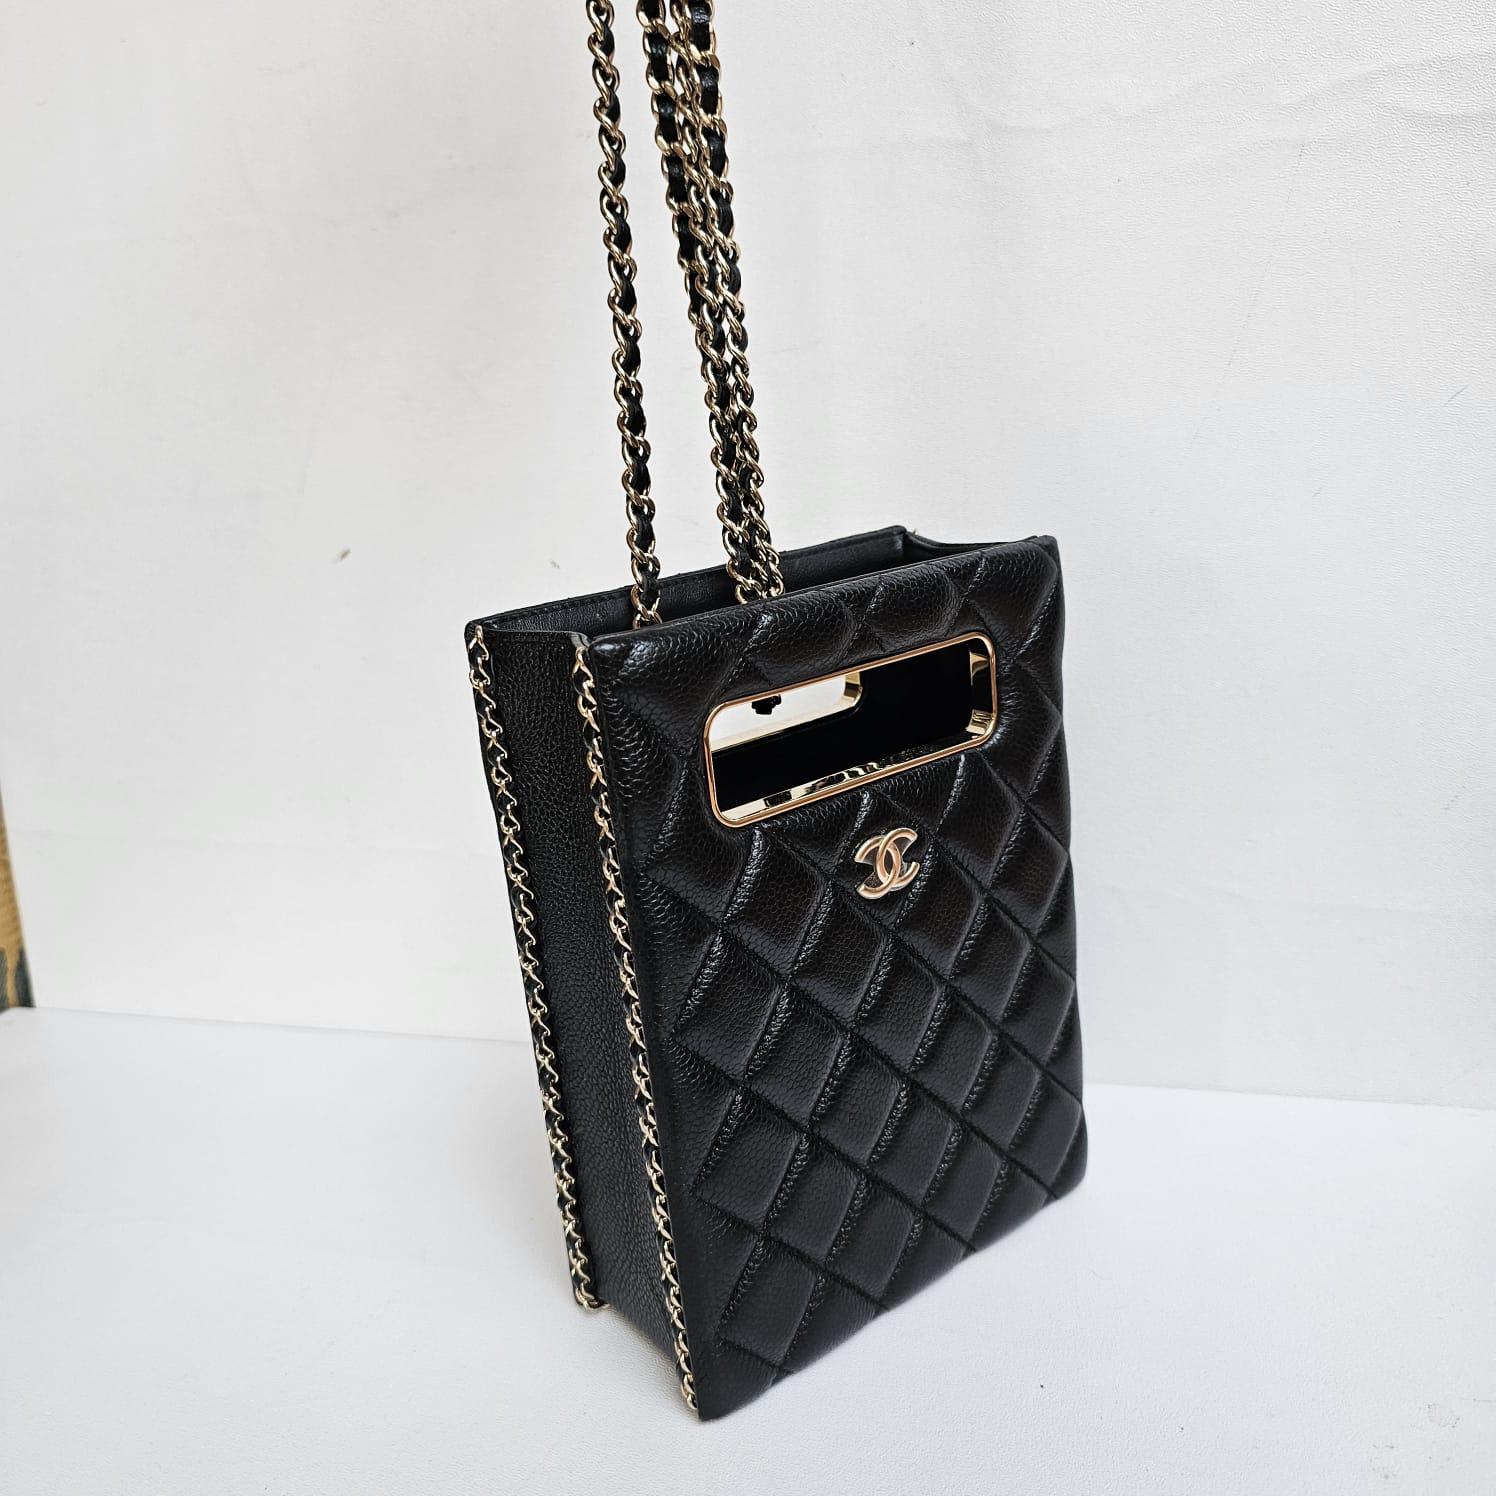 Chanel Black Caviar Quilted Evening Box Bag For Sale 7